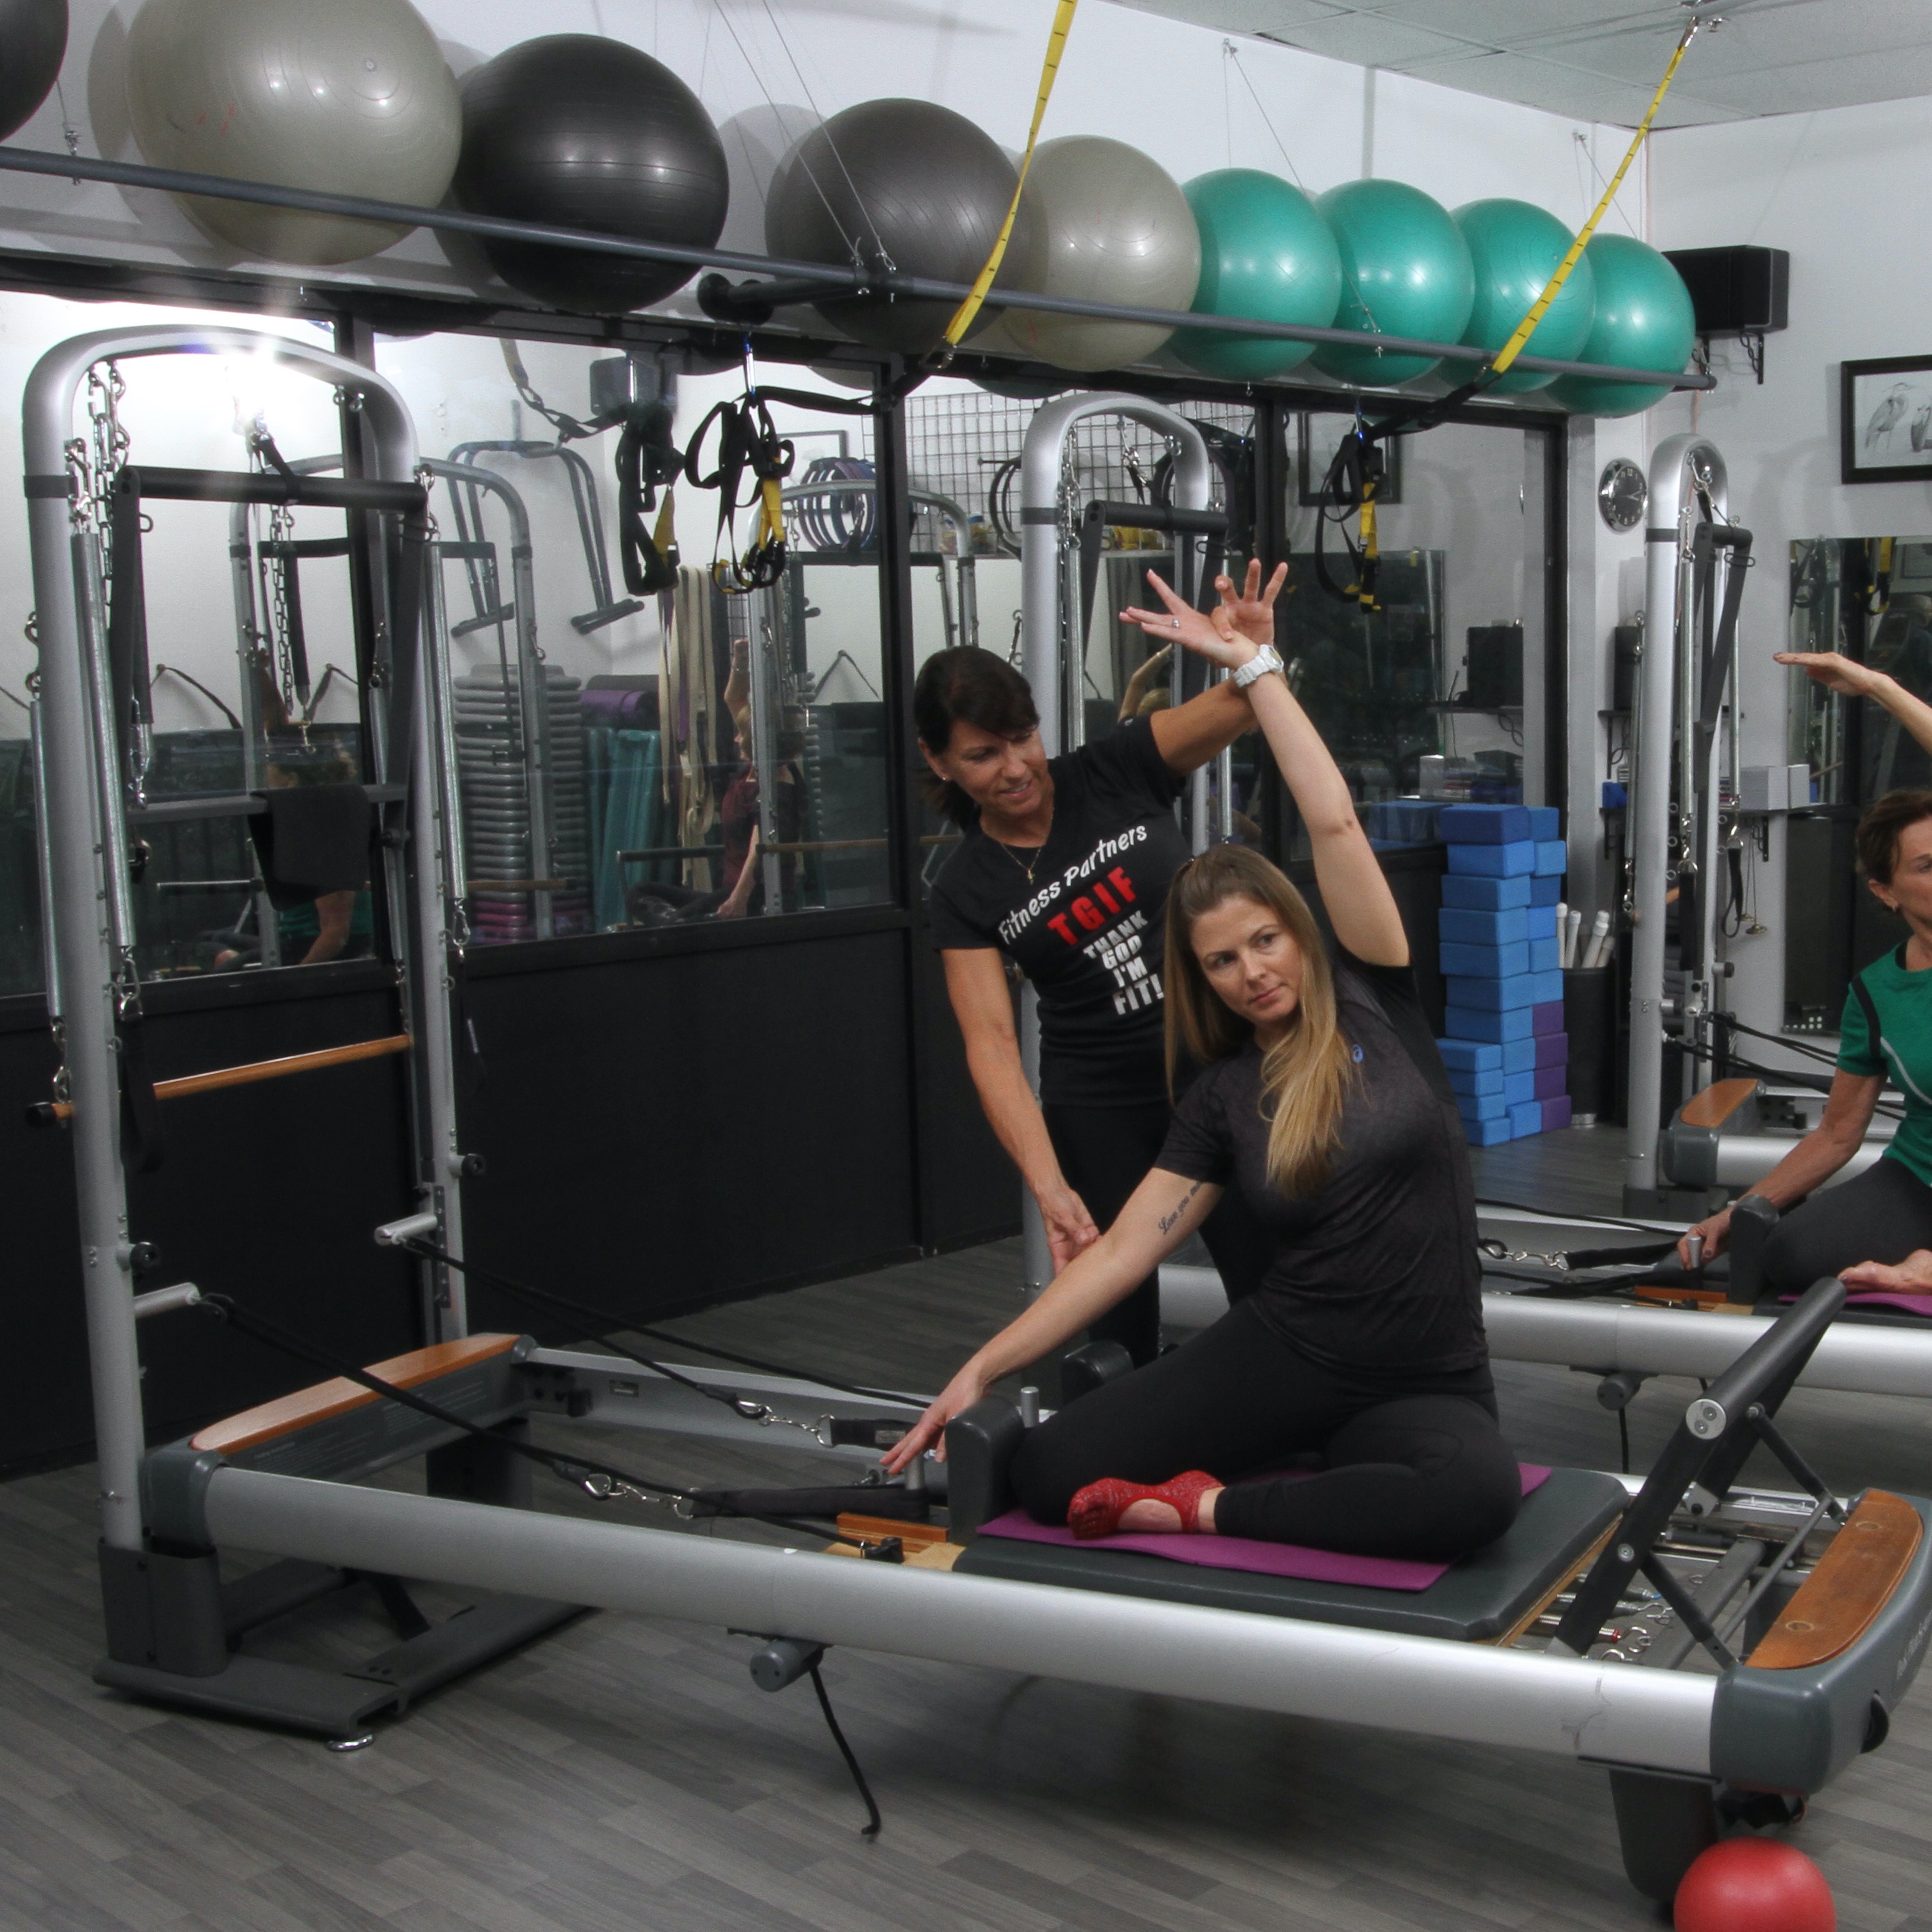 How To Use Pilate Reformer Workout Machine For Exercise